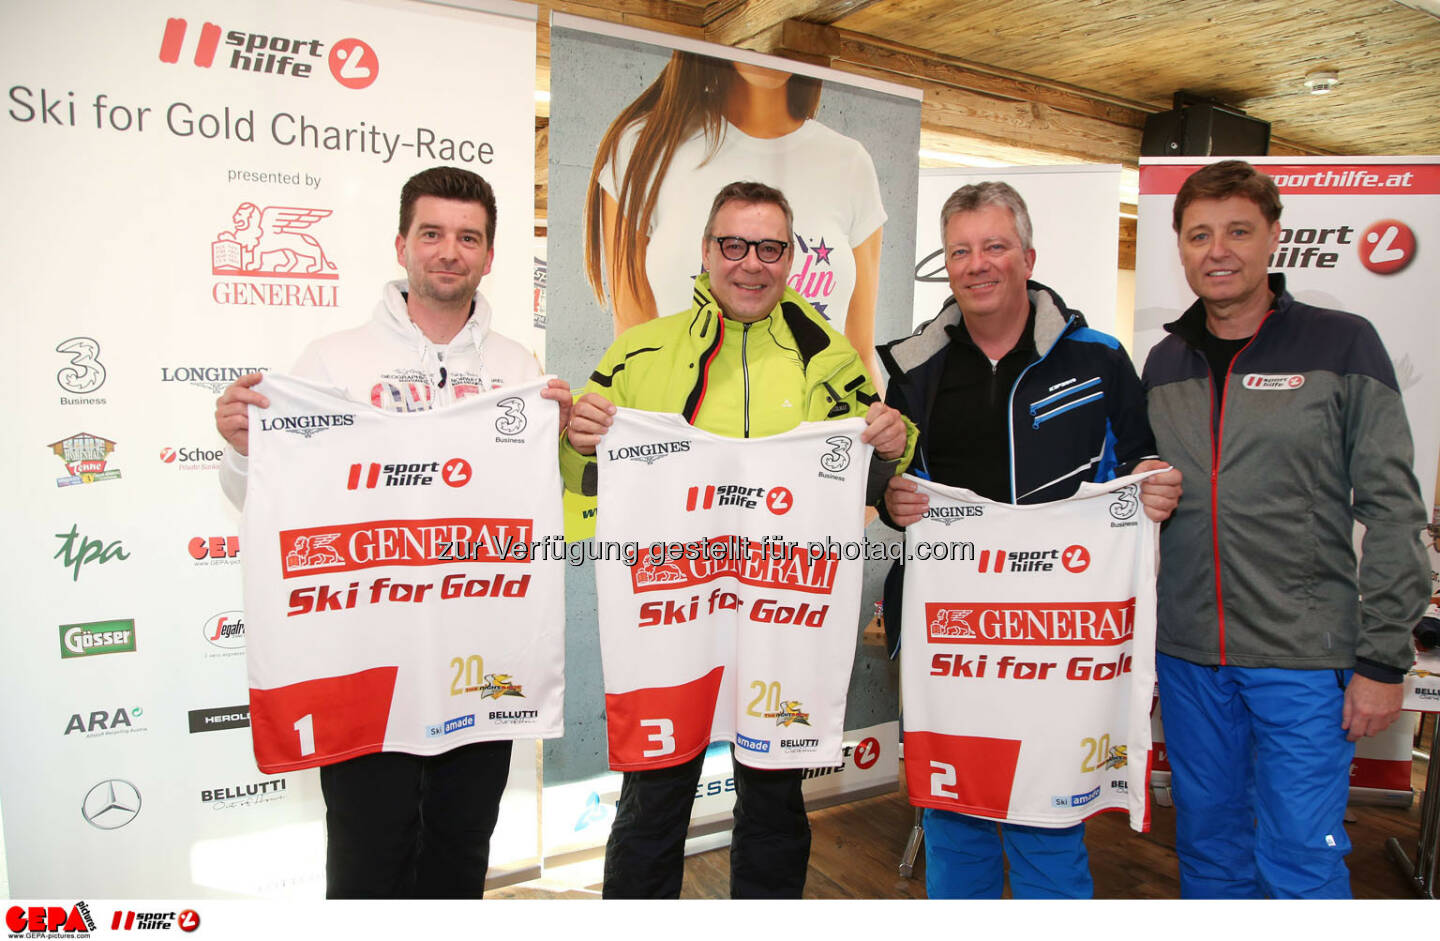 Ski for Gold Charity Race. Image shows Andre Bindlechner, Markus Murgg, Wolfgang Gratzer and managing director Harald Bauer (Sporthilfe). Photo: GEPA pictures/ Harald Steiner